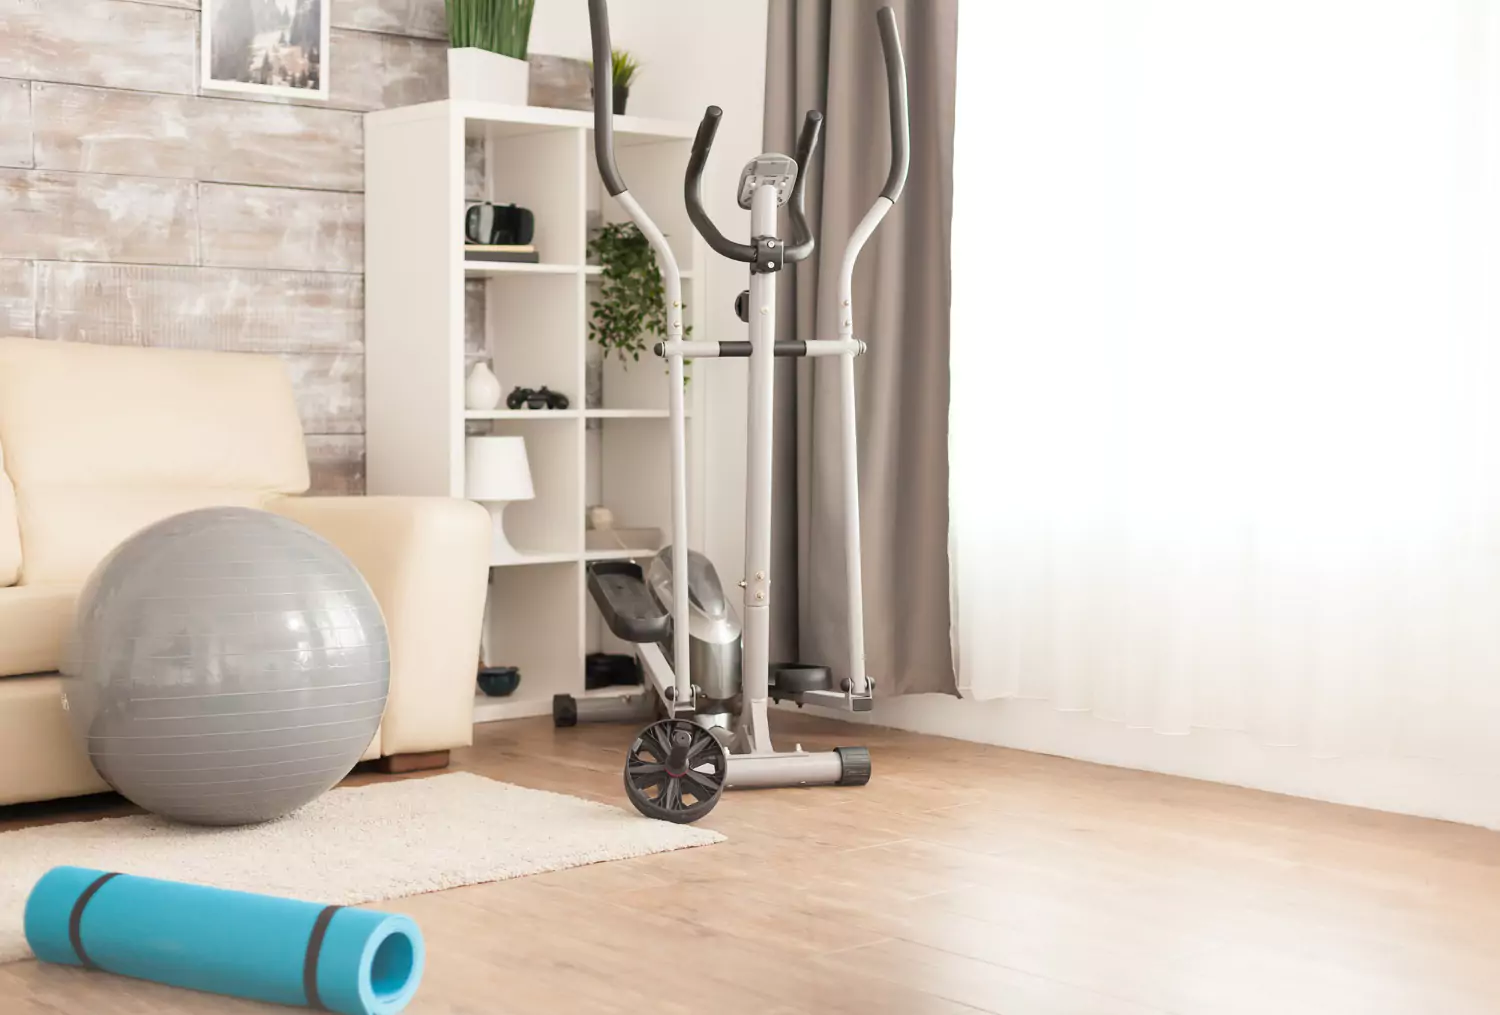 Maximize Wellness: Benefits Of A Home Gym With Quantum Fitness Equipment